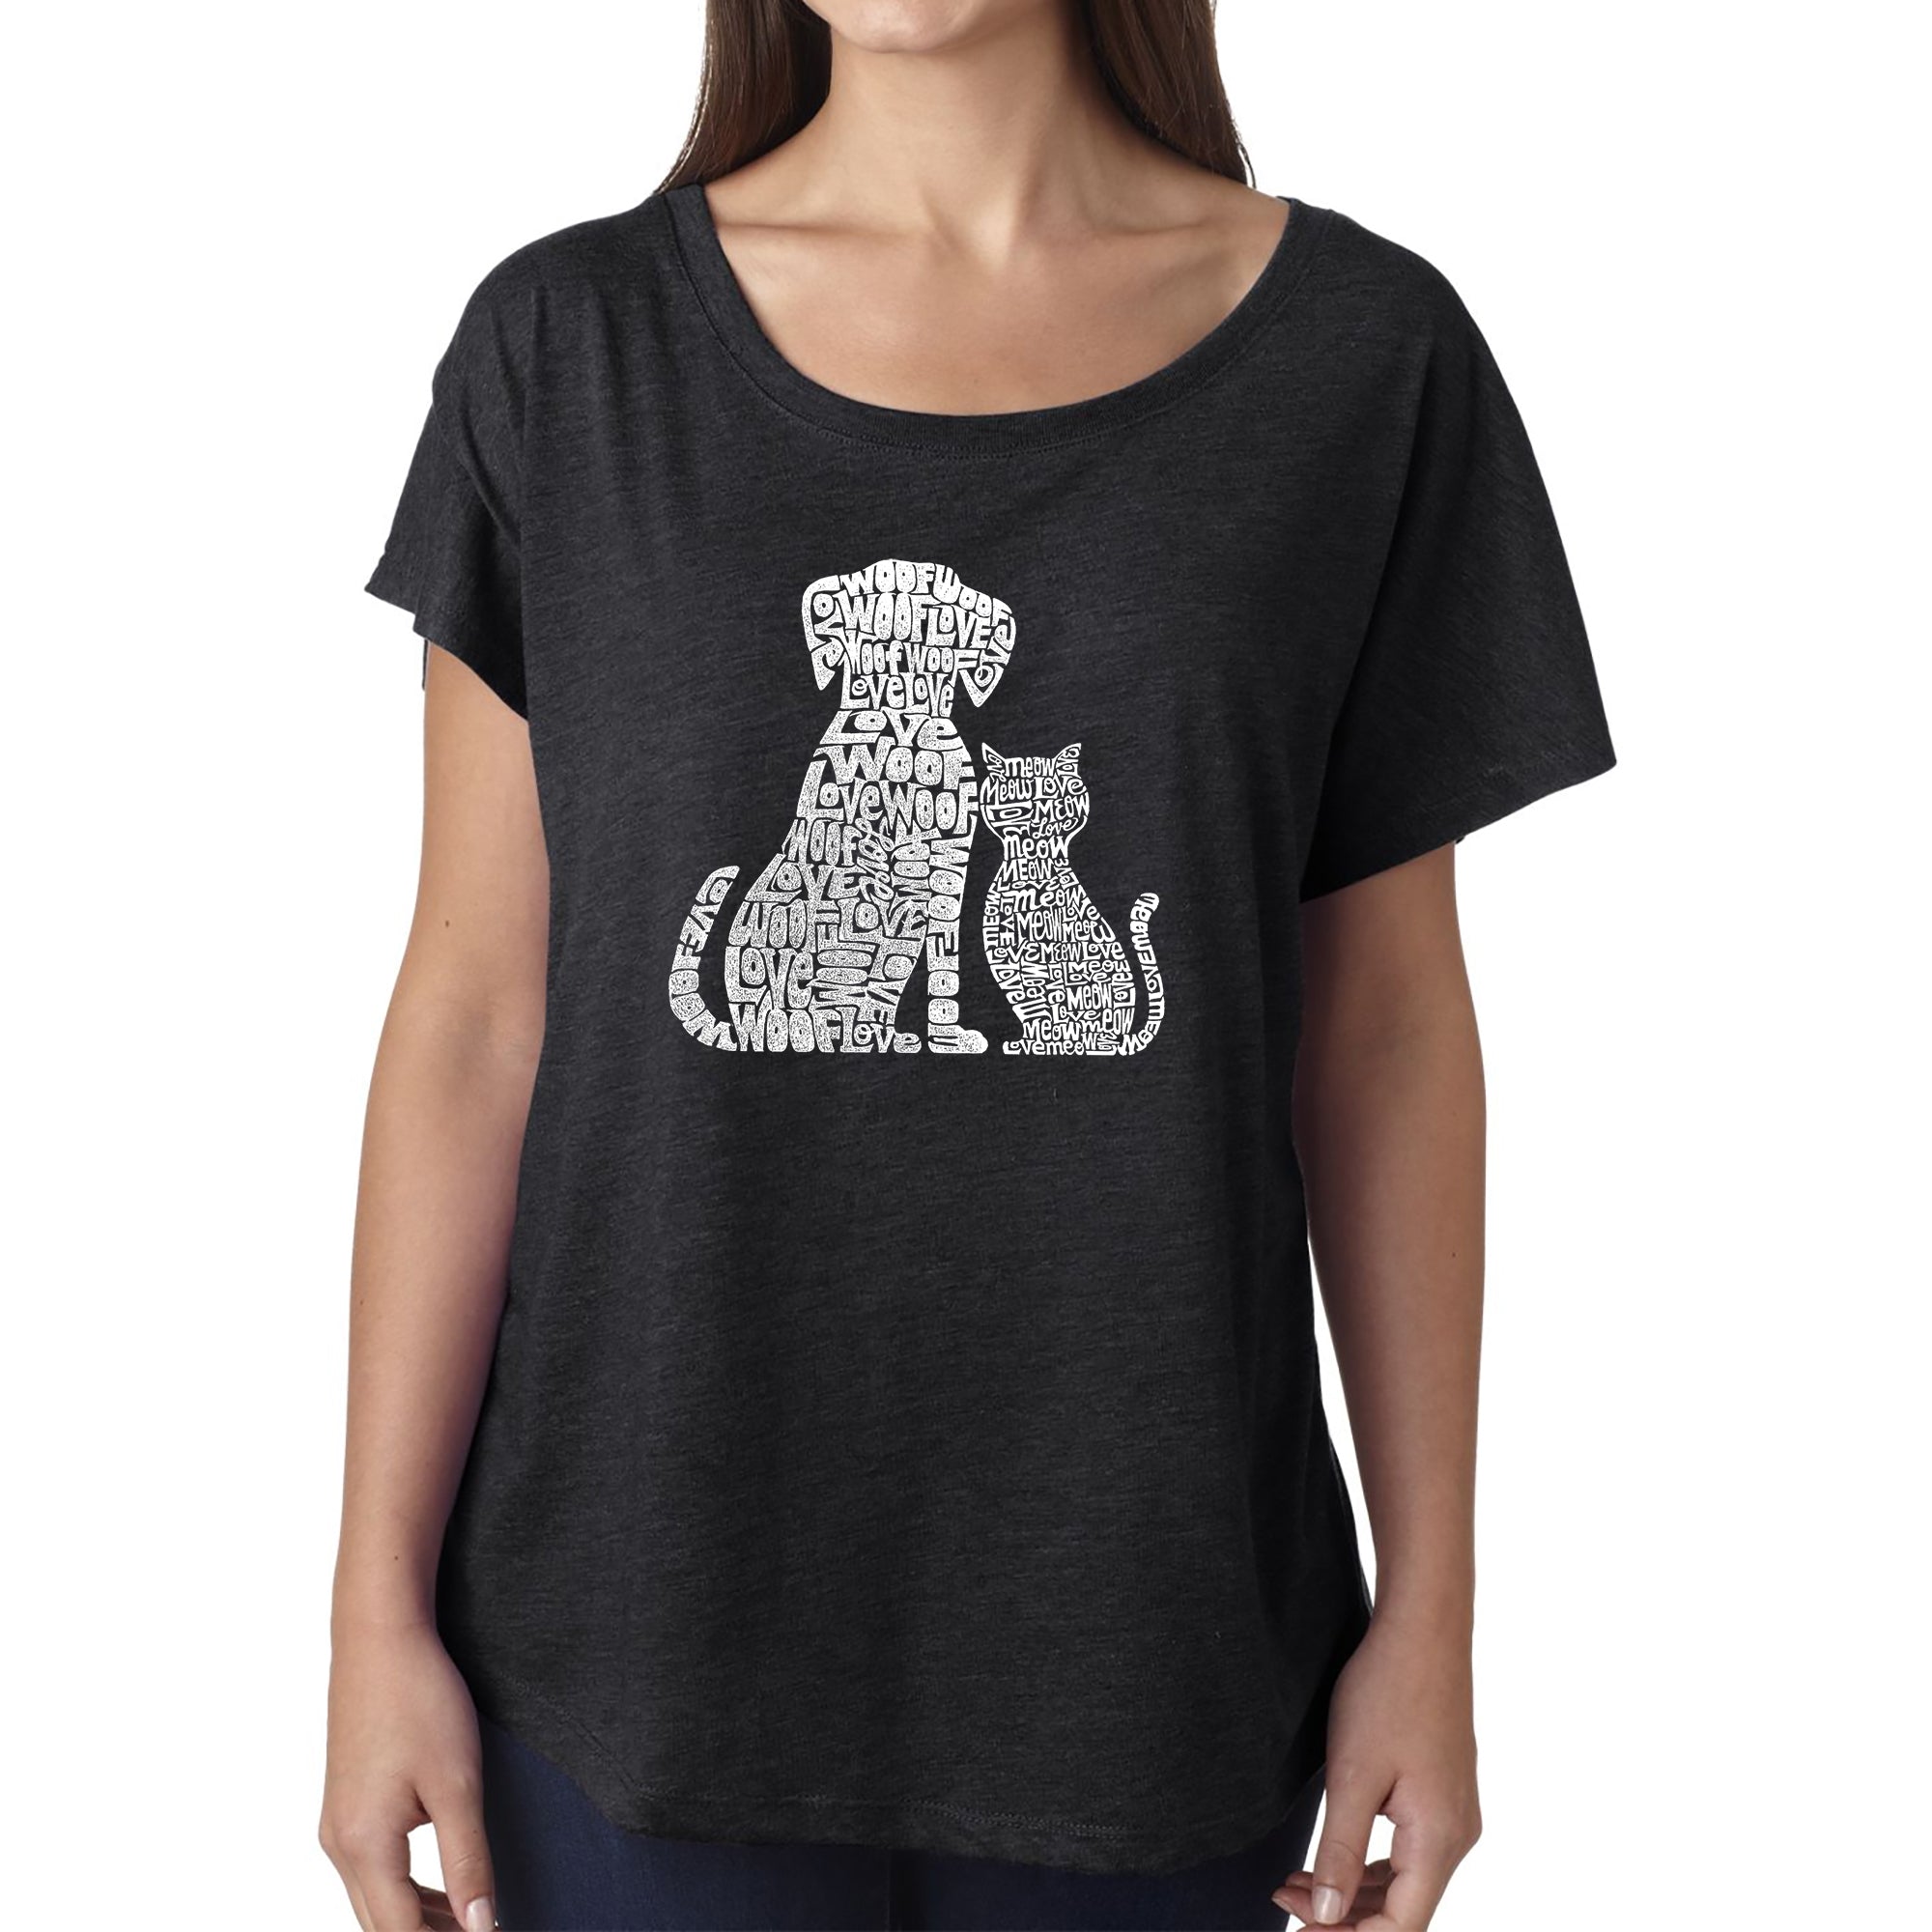 Dogs And Cats - Women's Loose Fit Dolman Cut Word Art Shirt - Black - Small